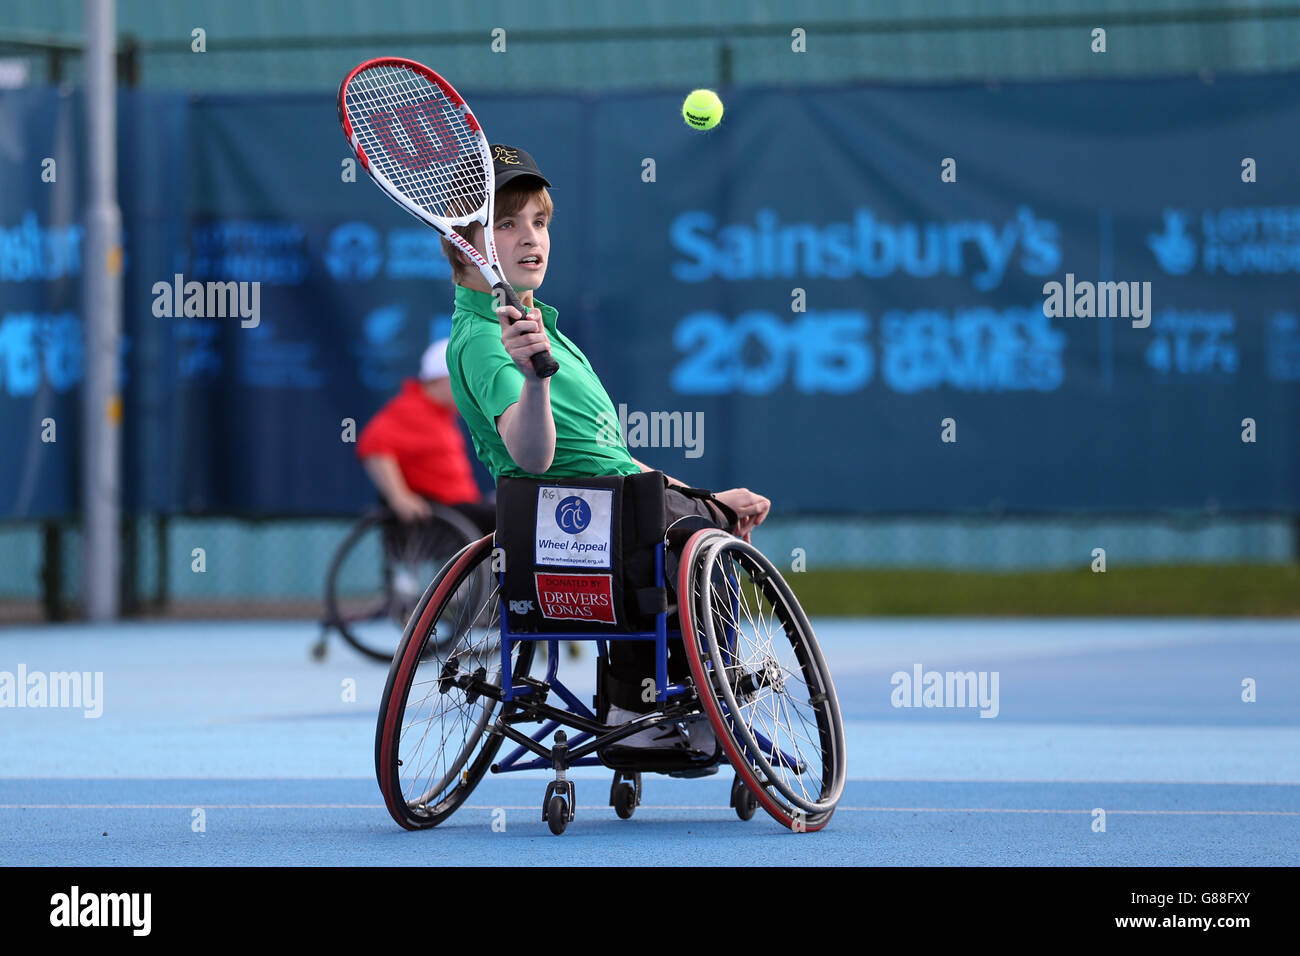 Northern Ireland's Ross Gourley takes a shot during the wheelchair tennis at the Sainsbury's 2015 School Games at the Regional Tennis Centre, Manchester. Stock Photo